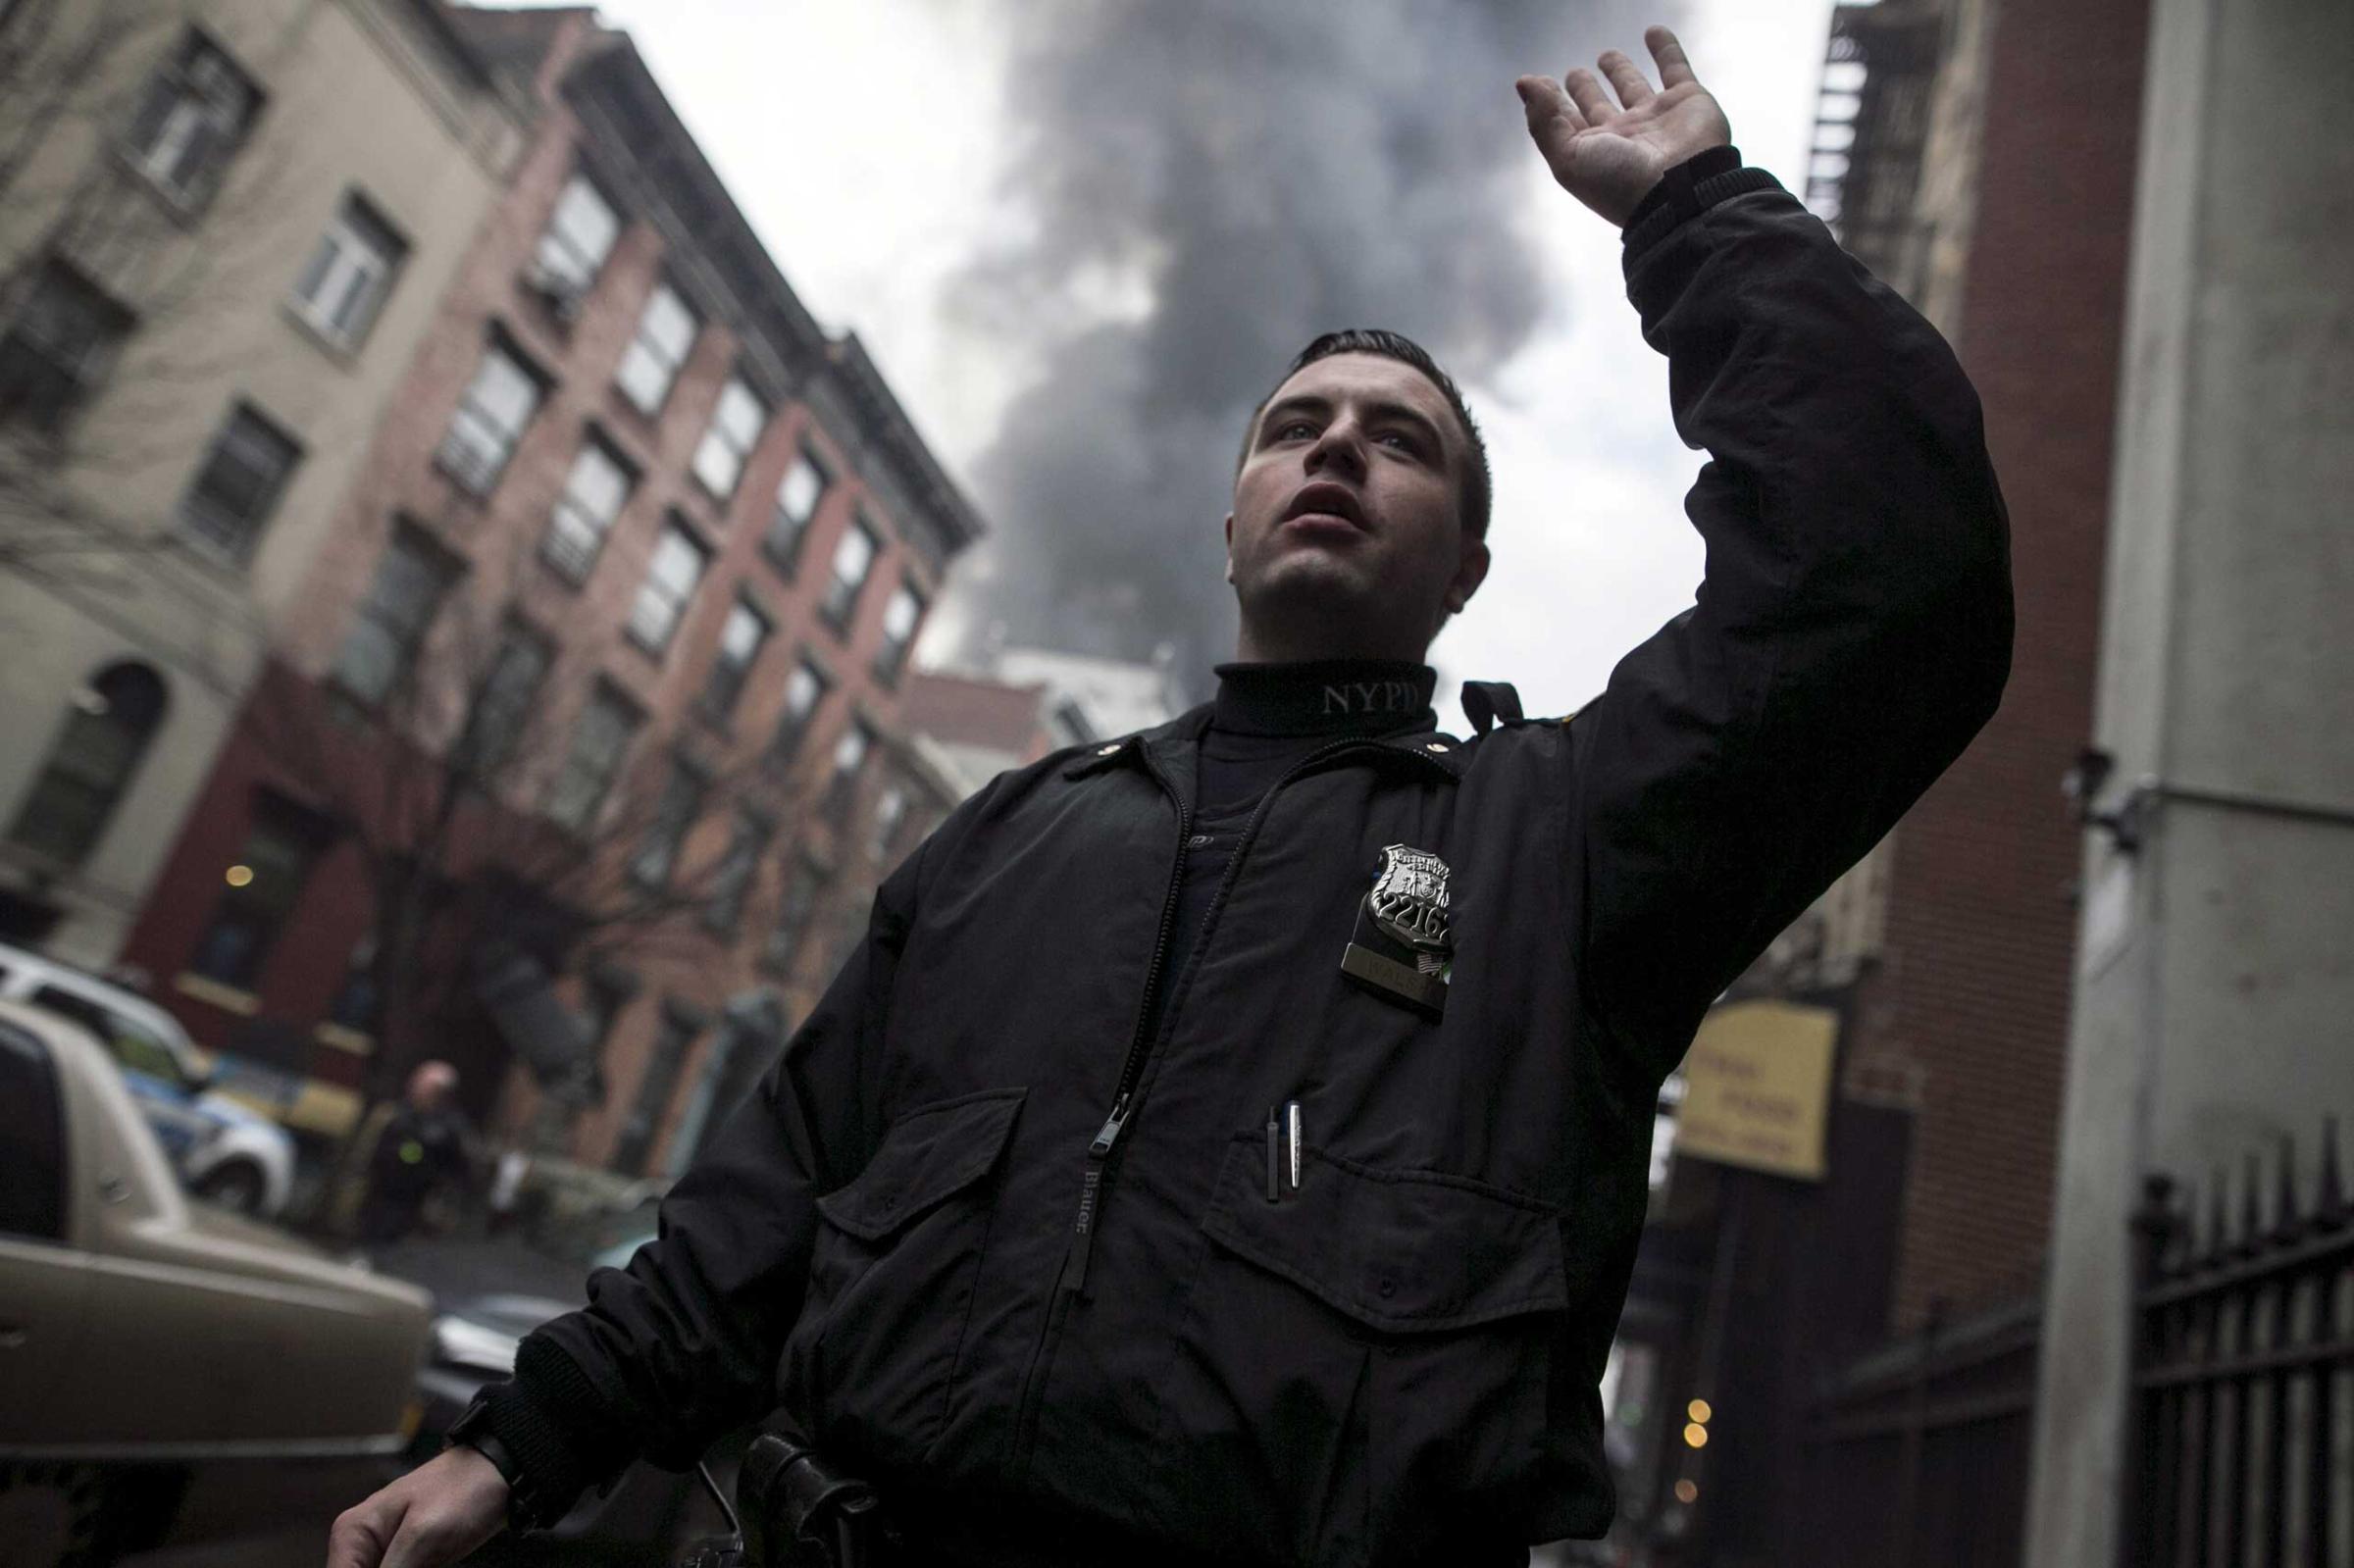 A NYPD signals residents way from the site of a building fire in the East Village neighborhood of New York City